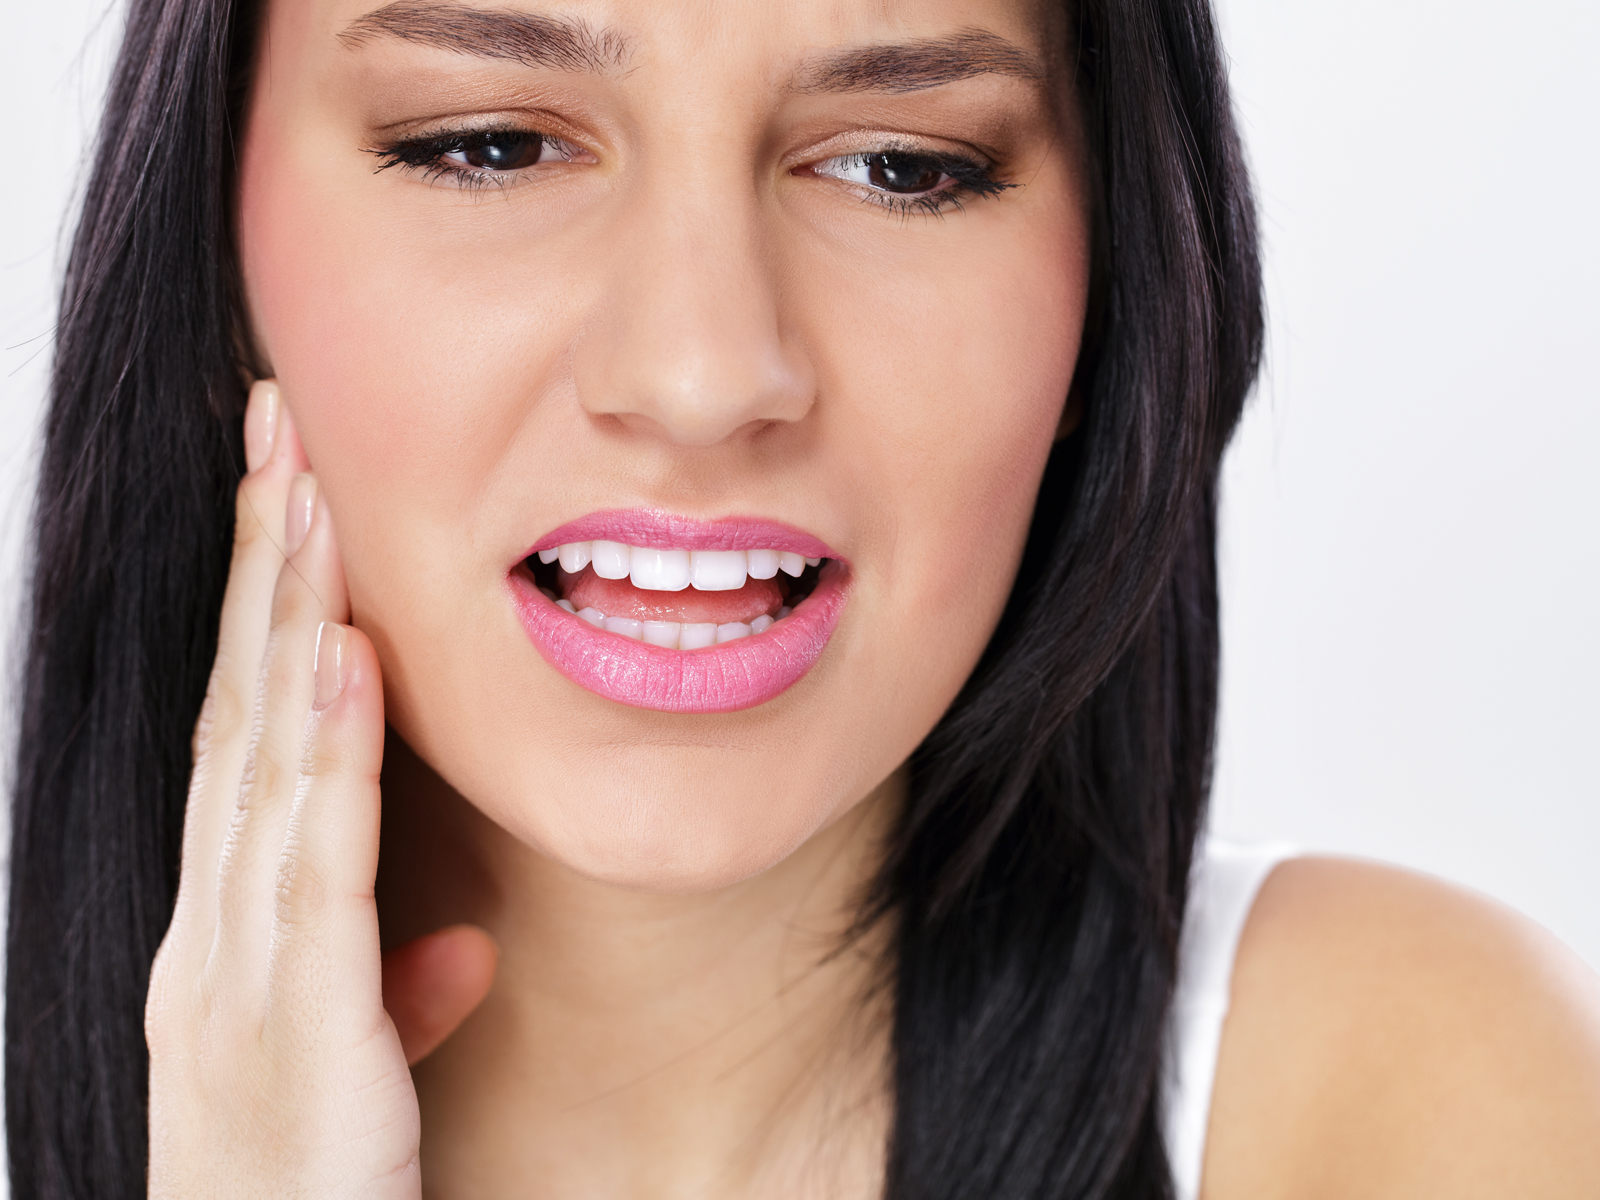 What are the most common dental problems?